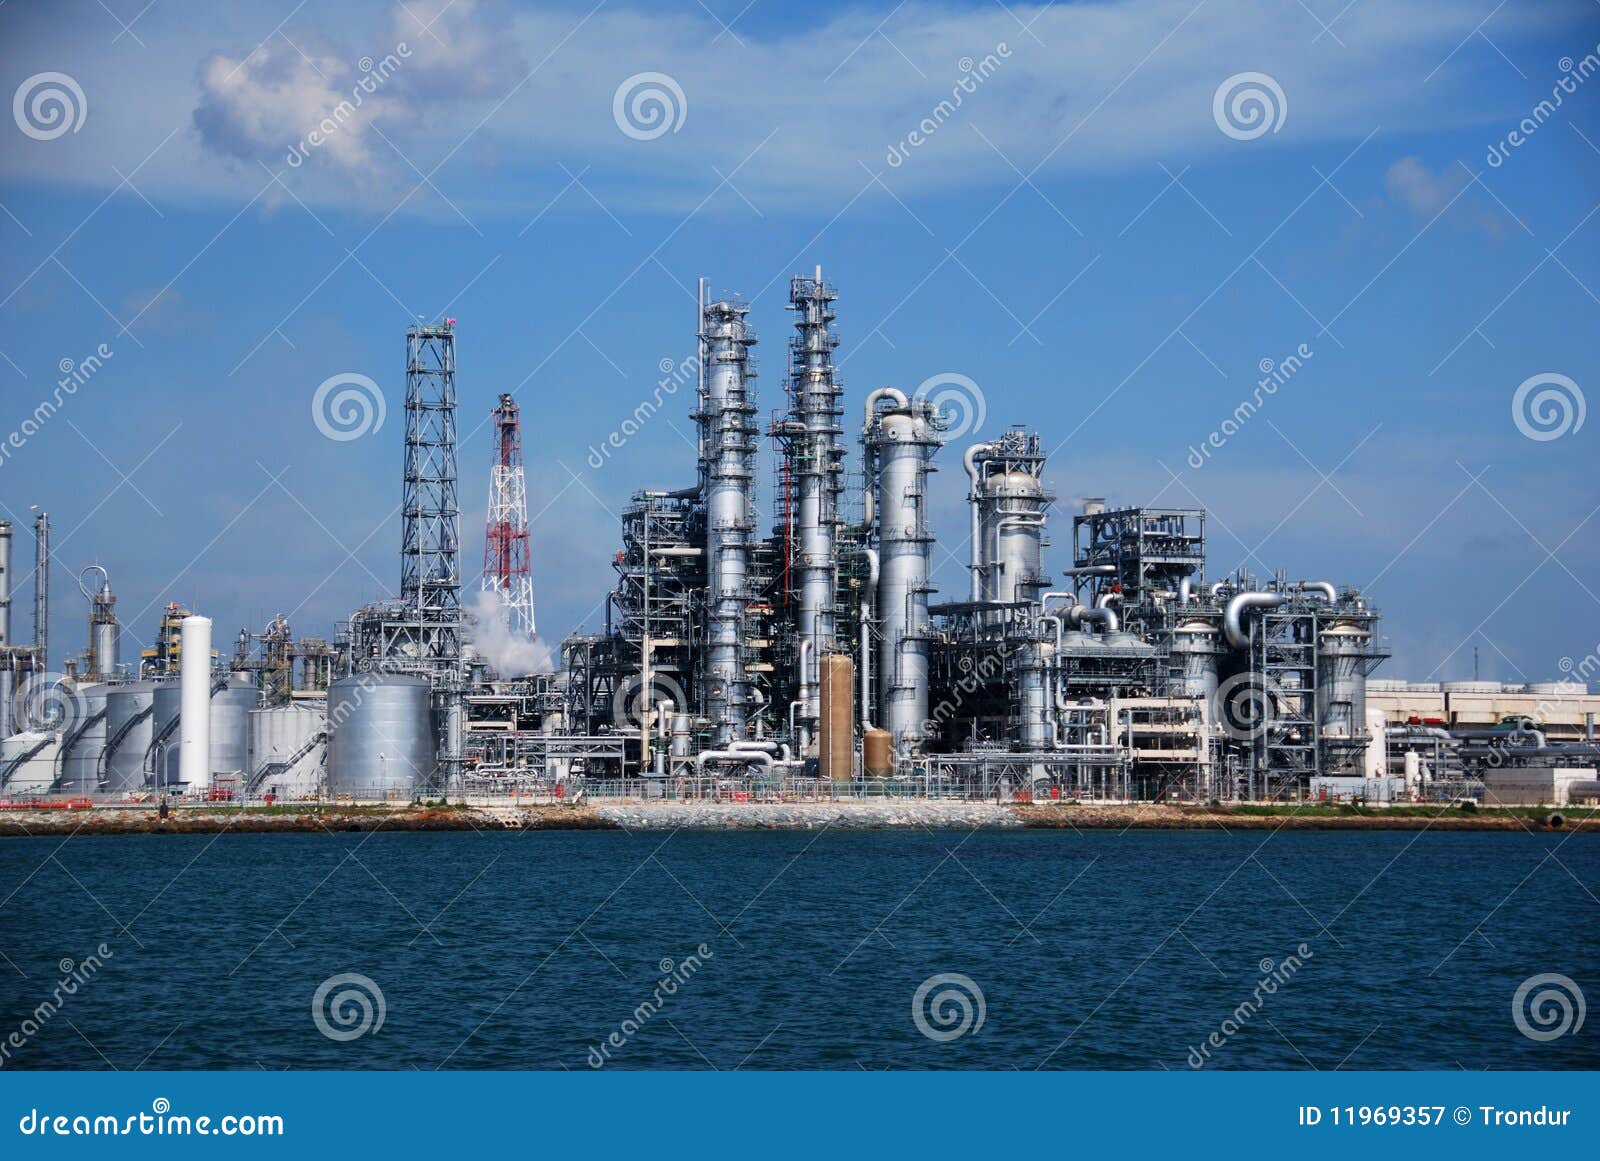 refinery in singapore